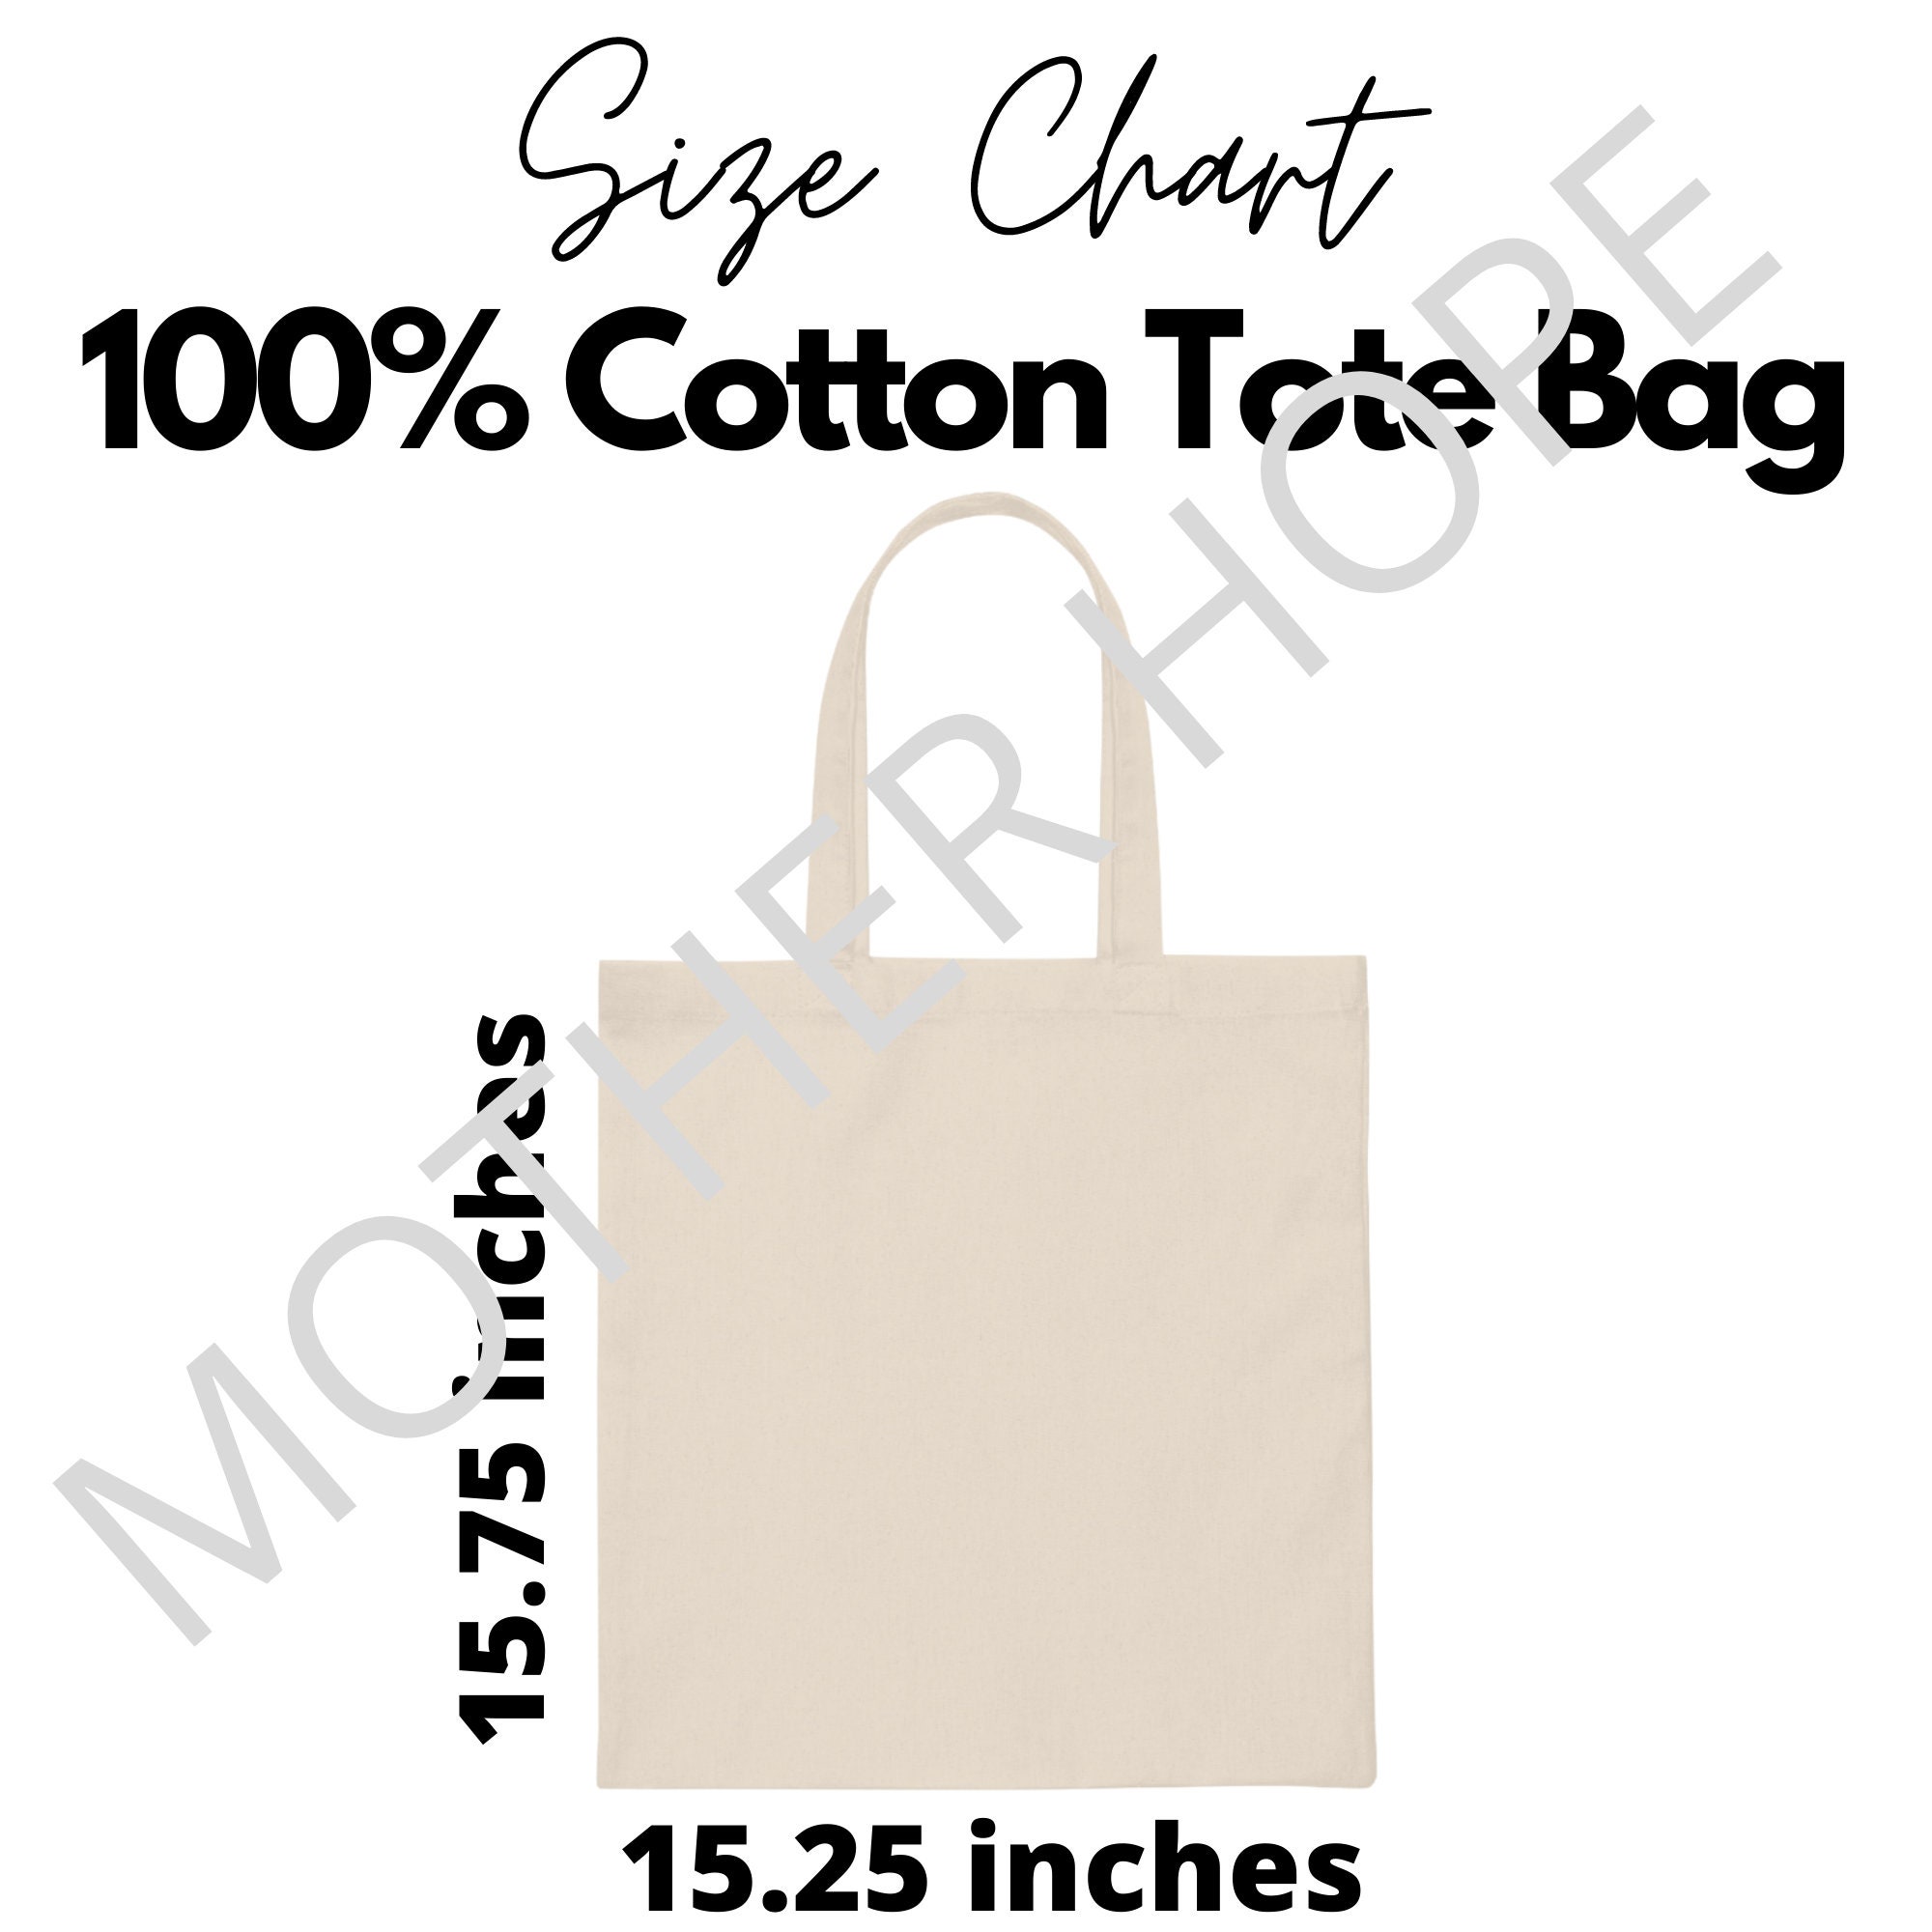 Cotton Tote Bag Size Chart Tote Bag Size Chart Canvas Tote | Etsy